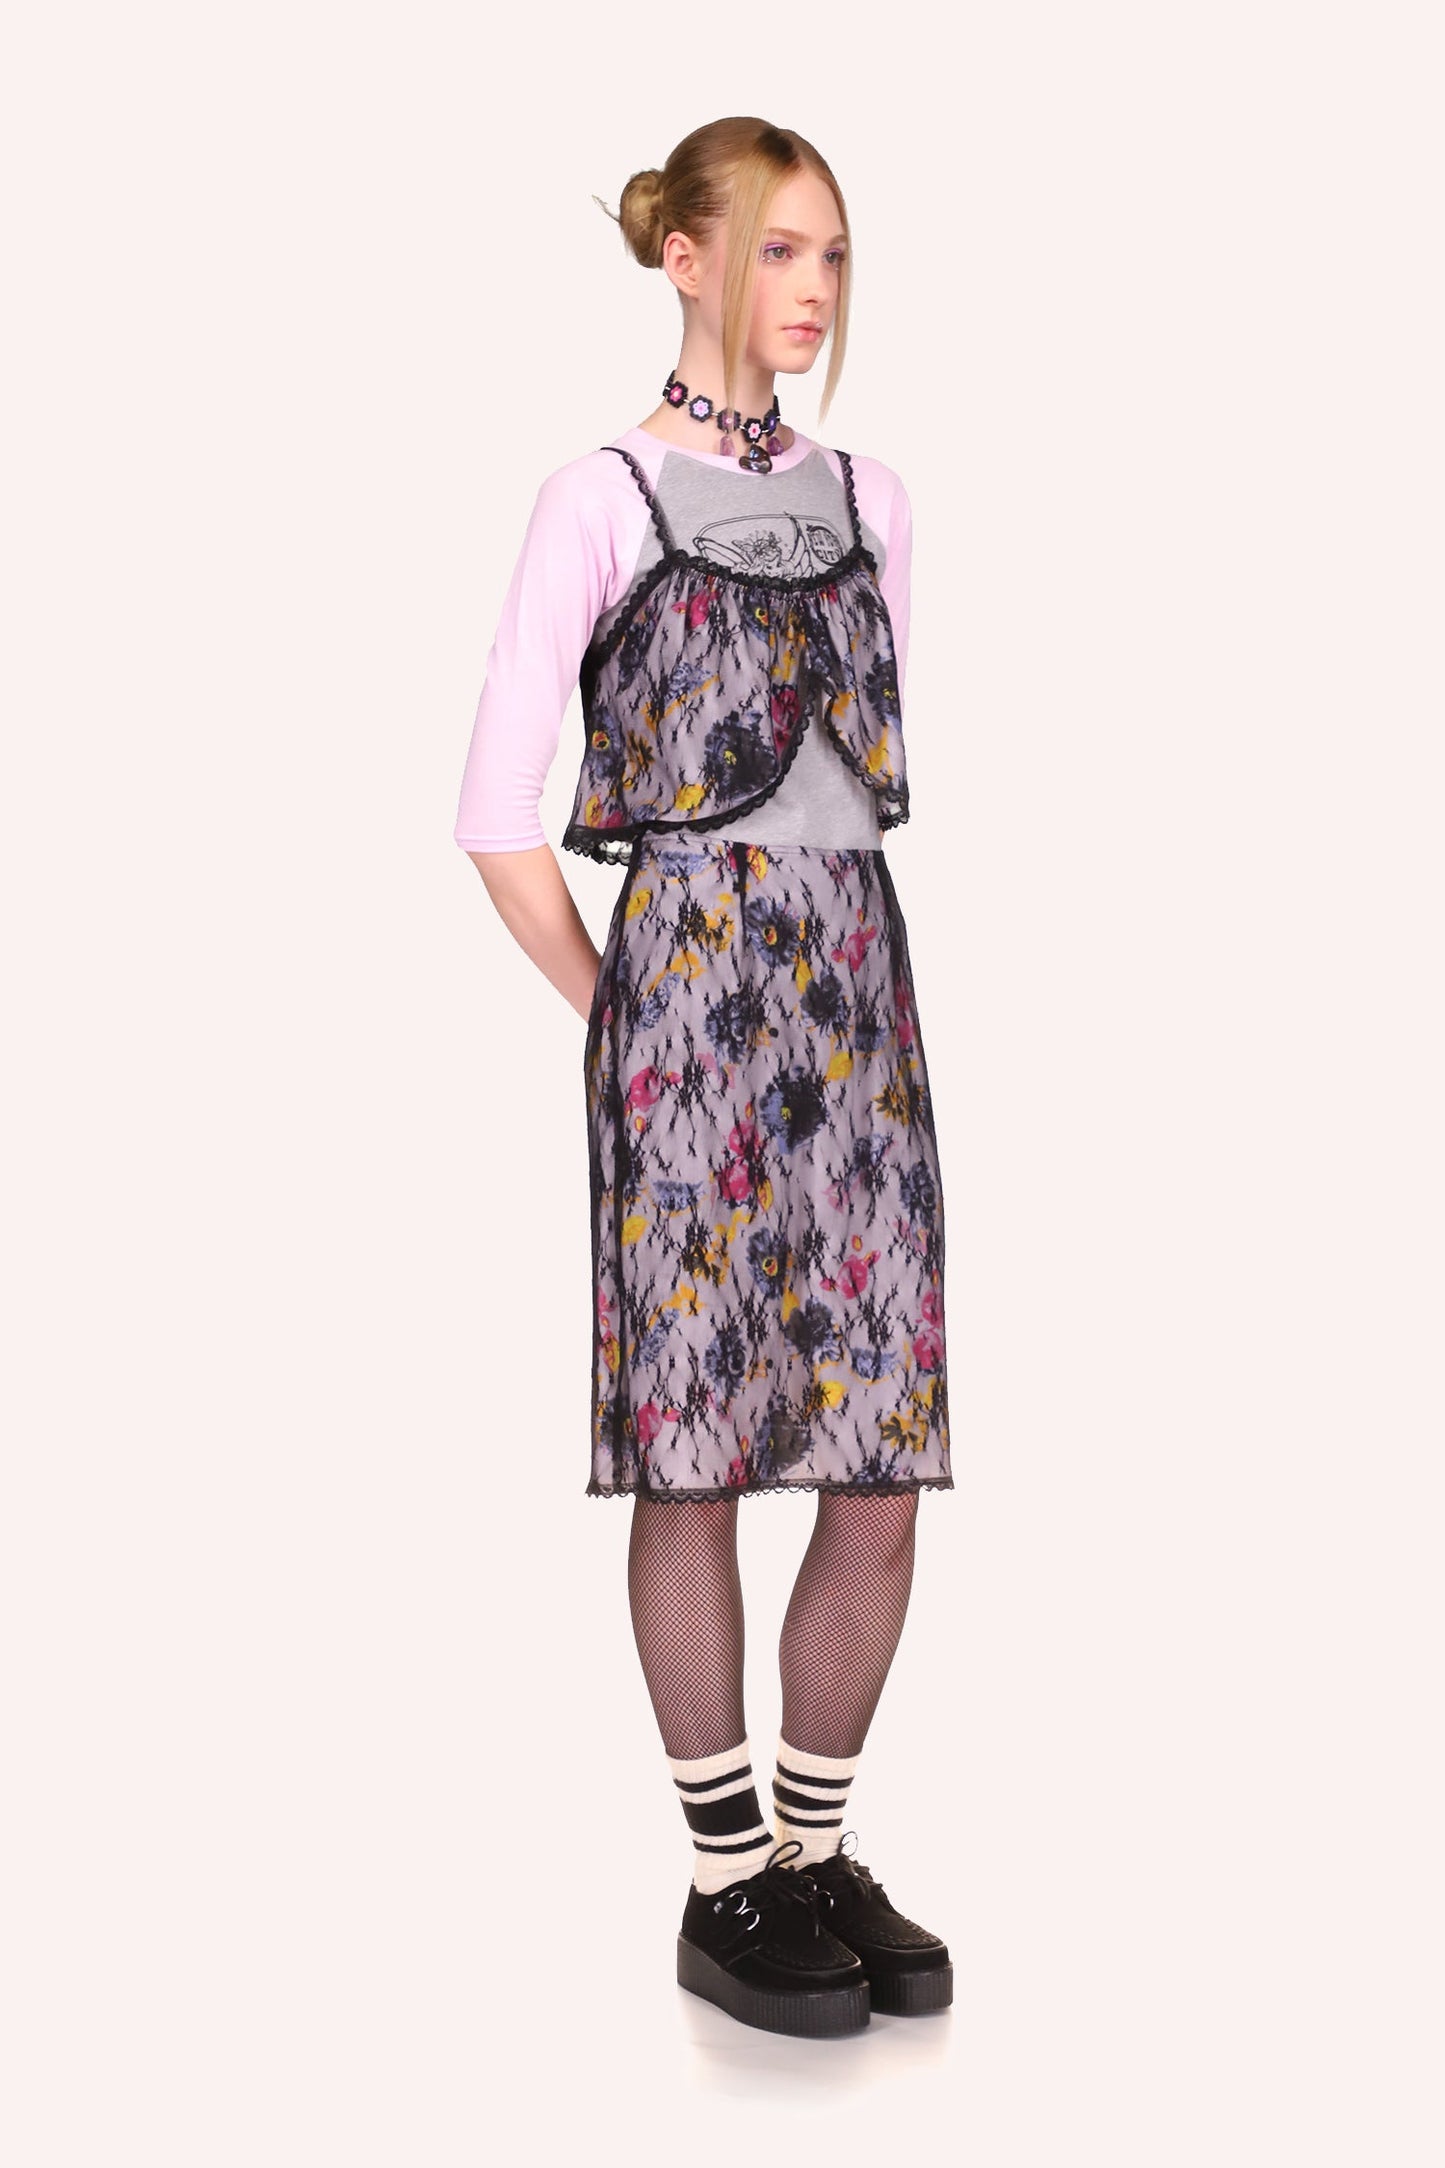 Knee-long skirt, pattern of lilac, pink, and yellow colors flowers, bottom, and side hems in black lace